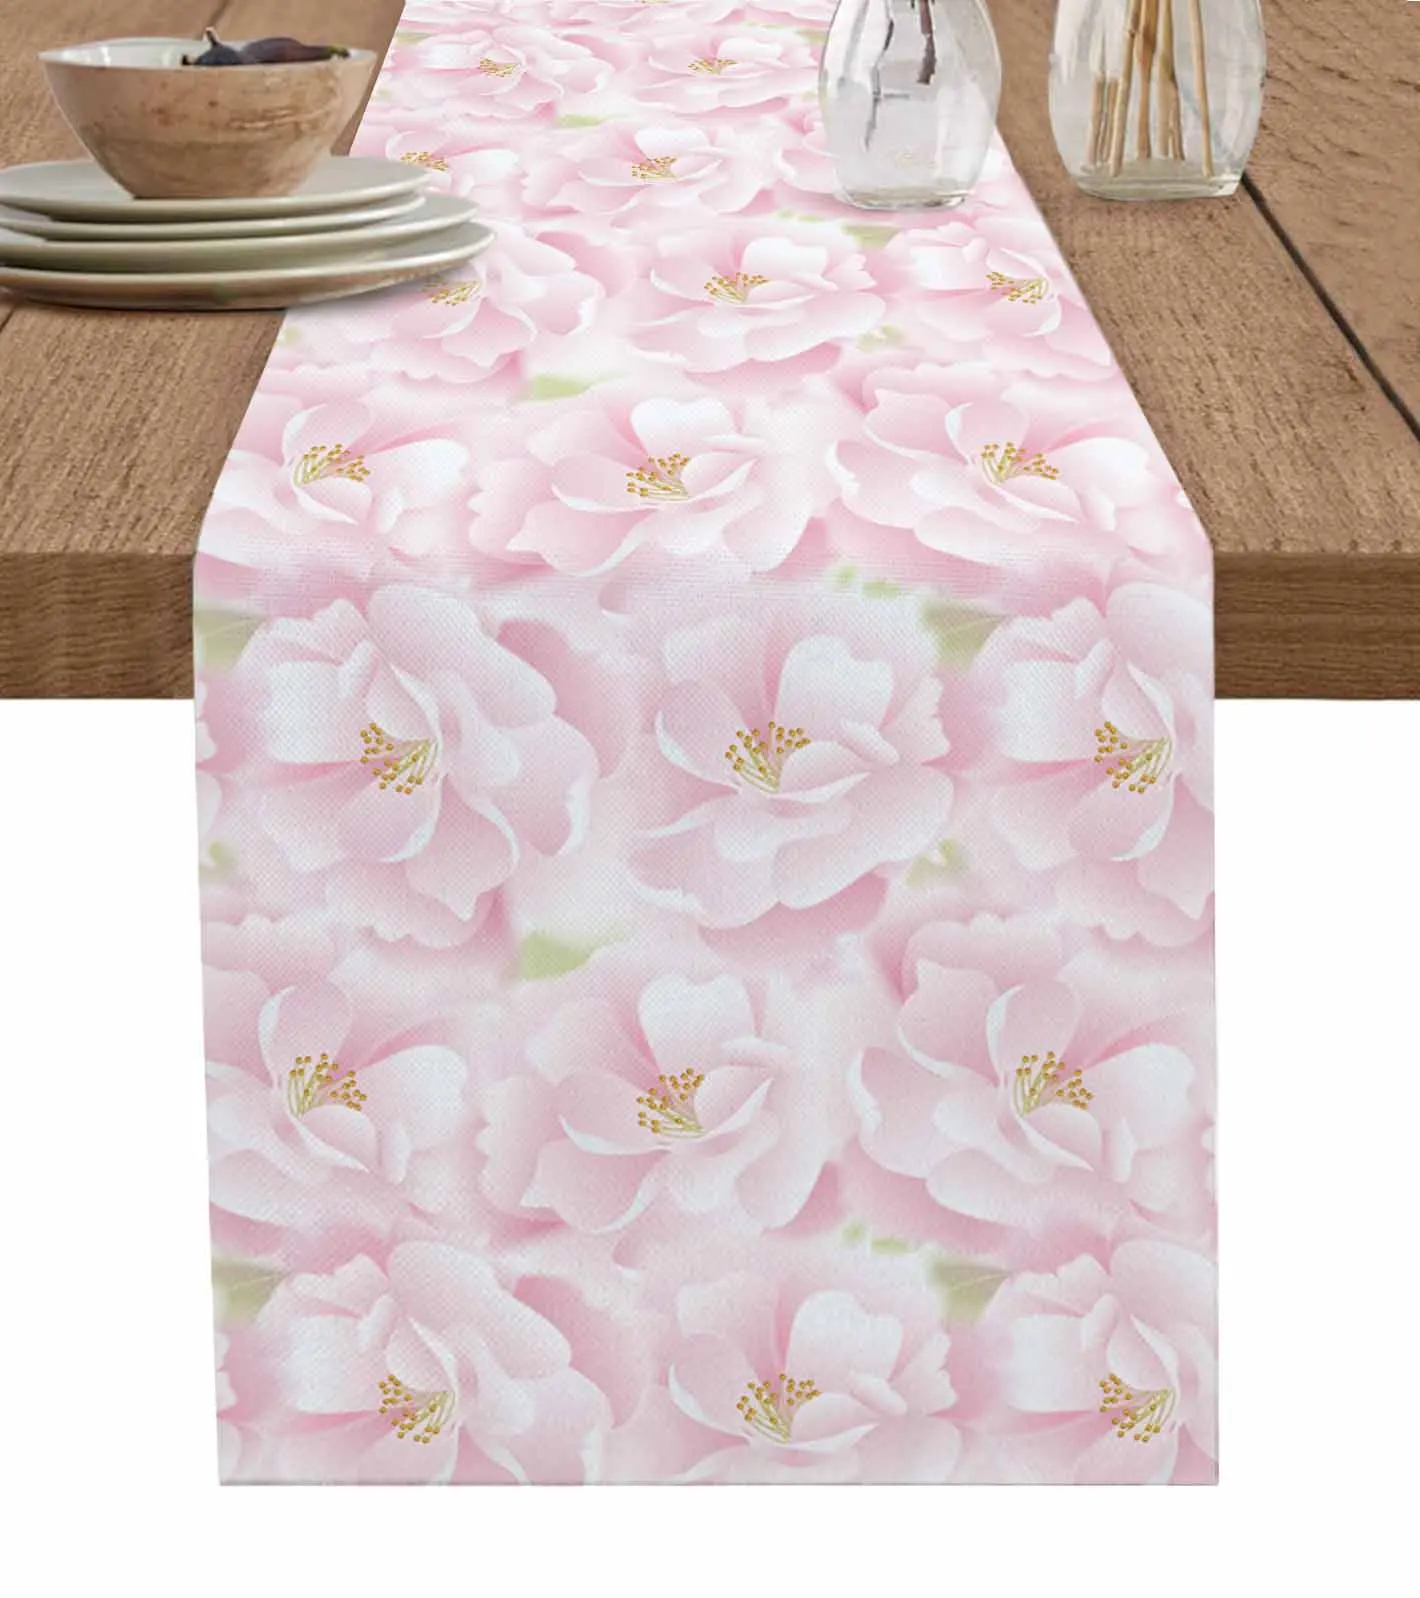 

Pink Flower Roses Texture Table Runner Luxury Wedding Decor Table Runner Home Dining Holiday Decor Tablecloth